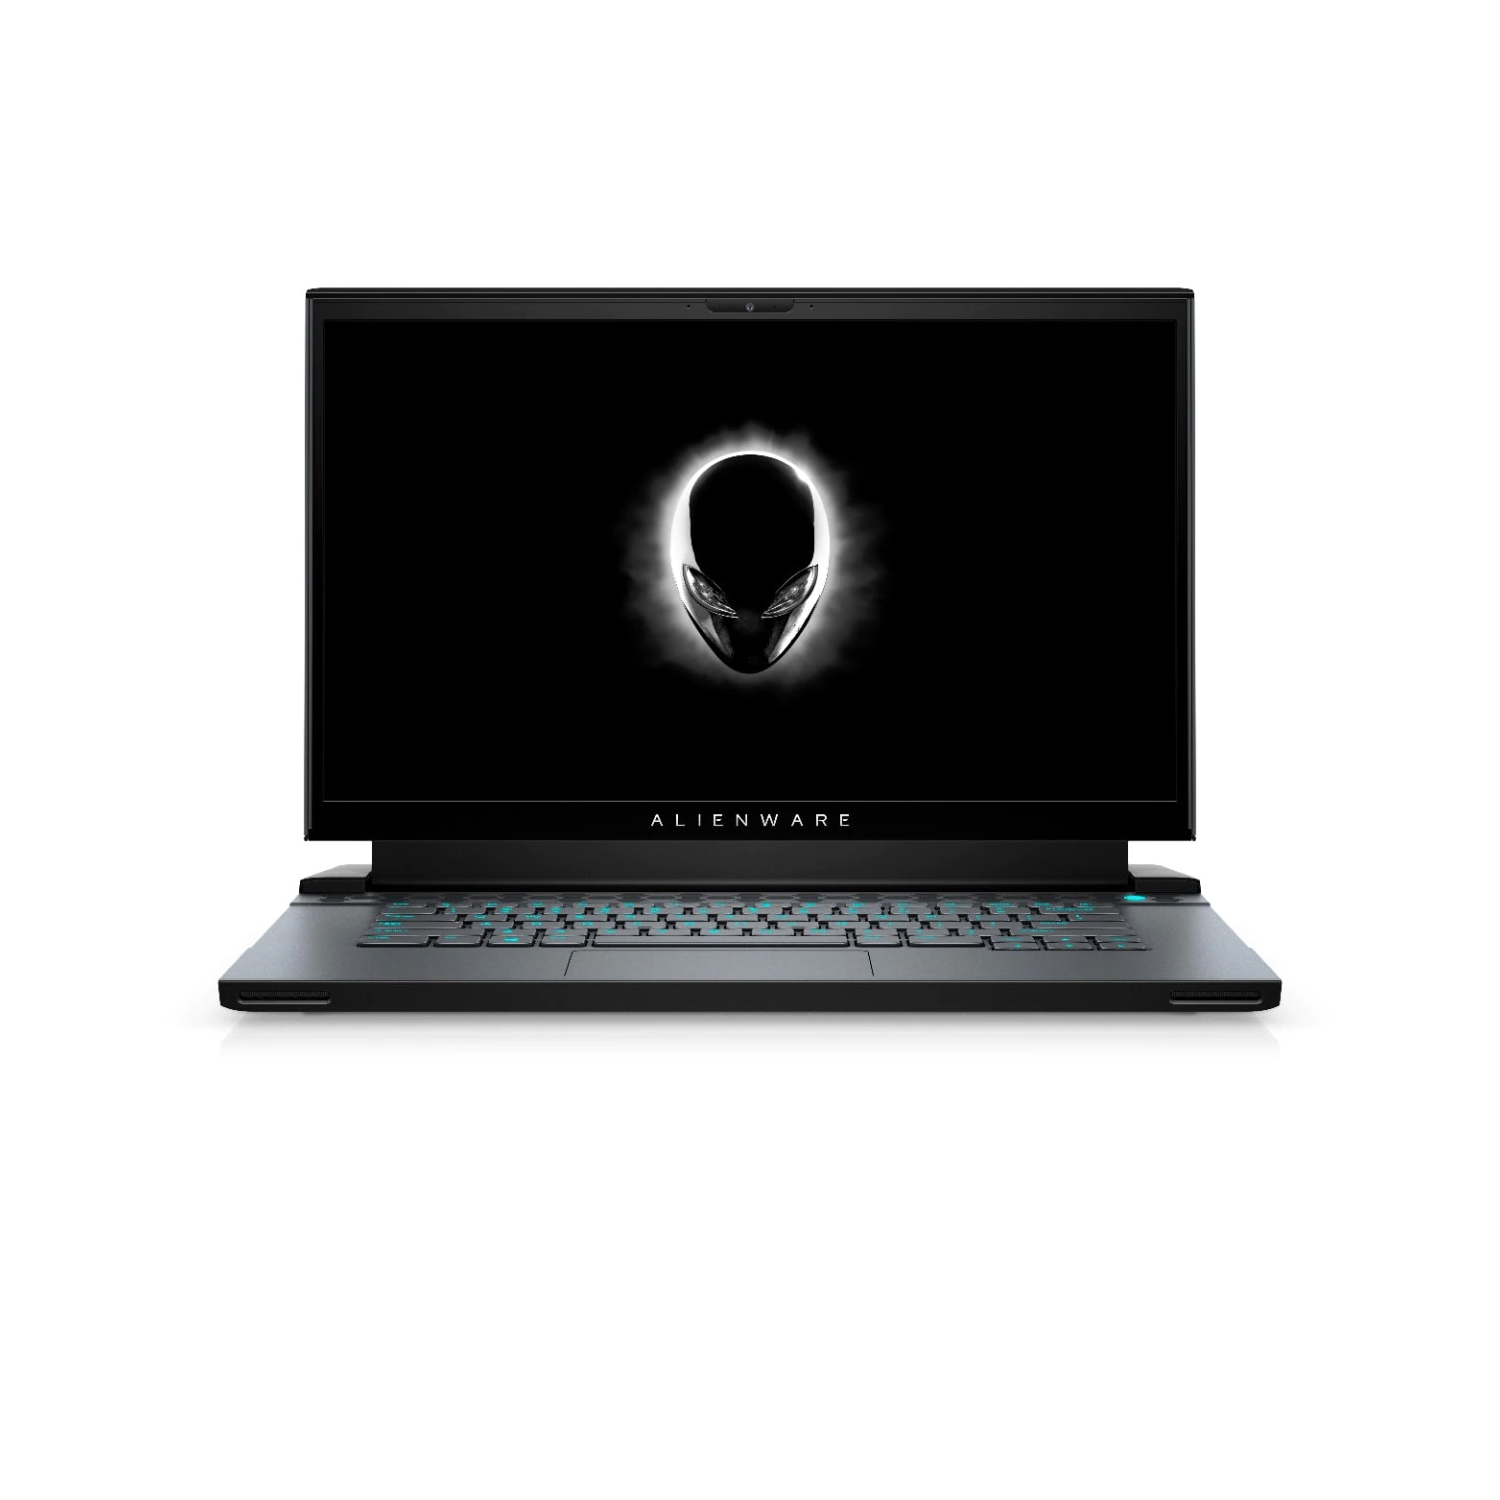 Refurbished (Excellent) – Dell Alienware m15 R4 Gaming Laptop (2021) | 15.6" FHD | Core i7 - 1TB SSD + 512GB SSD - 32GB RAM - RTX 3080 | 8 Cores @ 5 GHz - 10th Gen CPU - 8GB GDDR6X